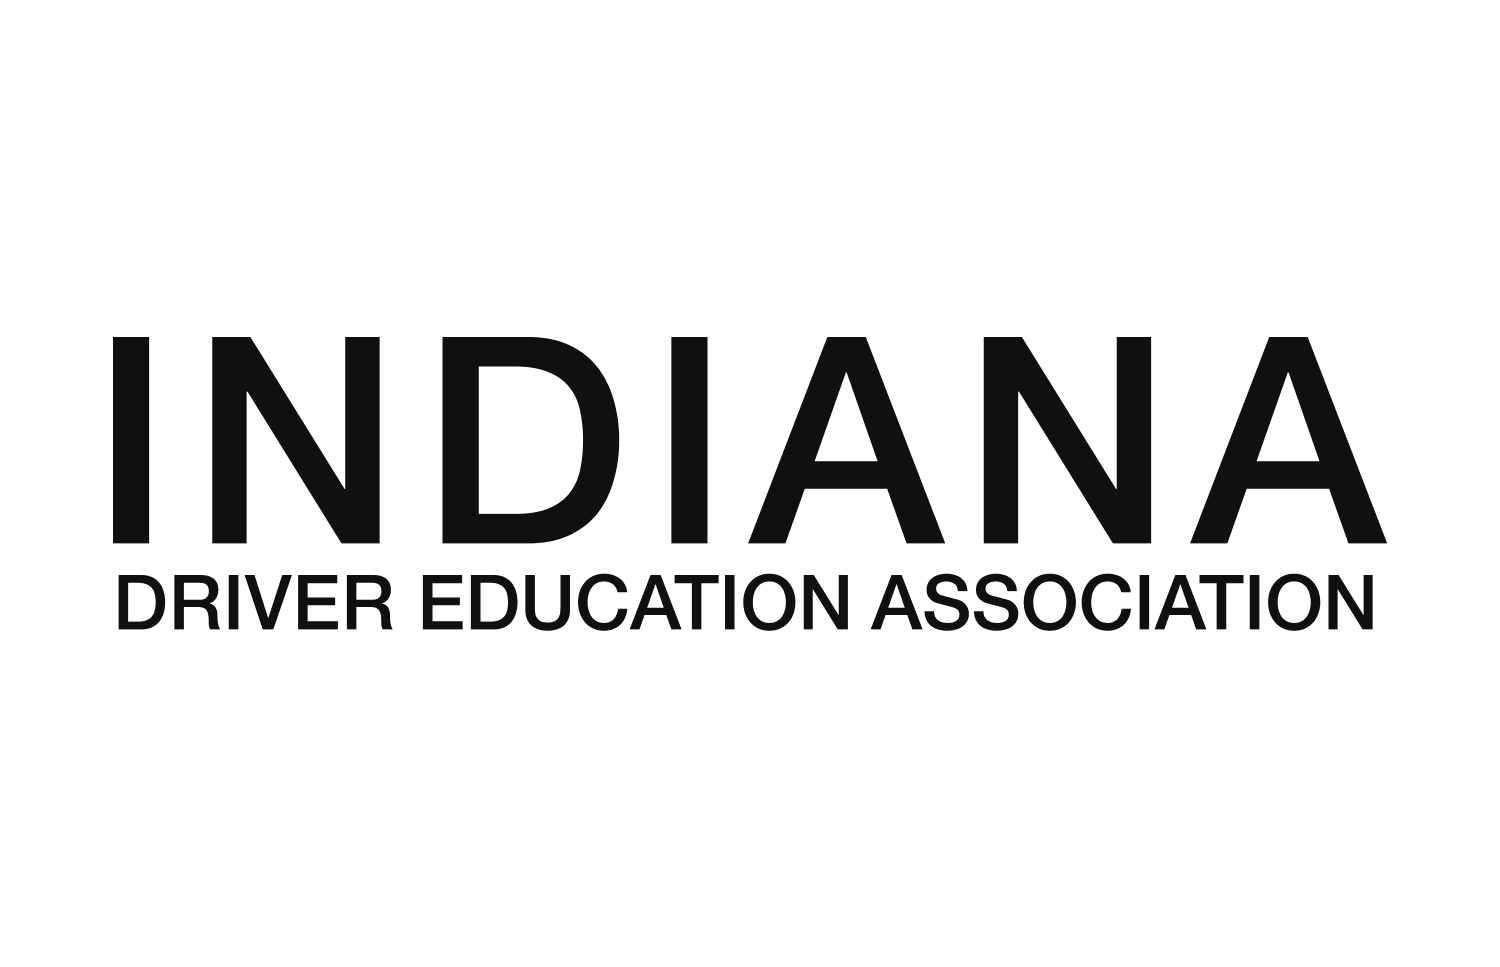 Logo for the State of Indiana Drivers Education Association.